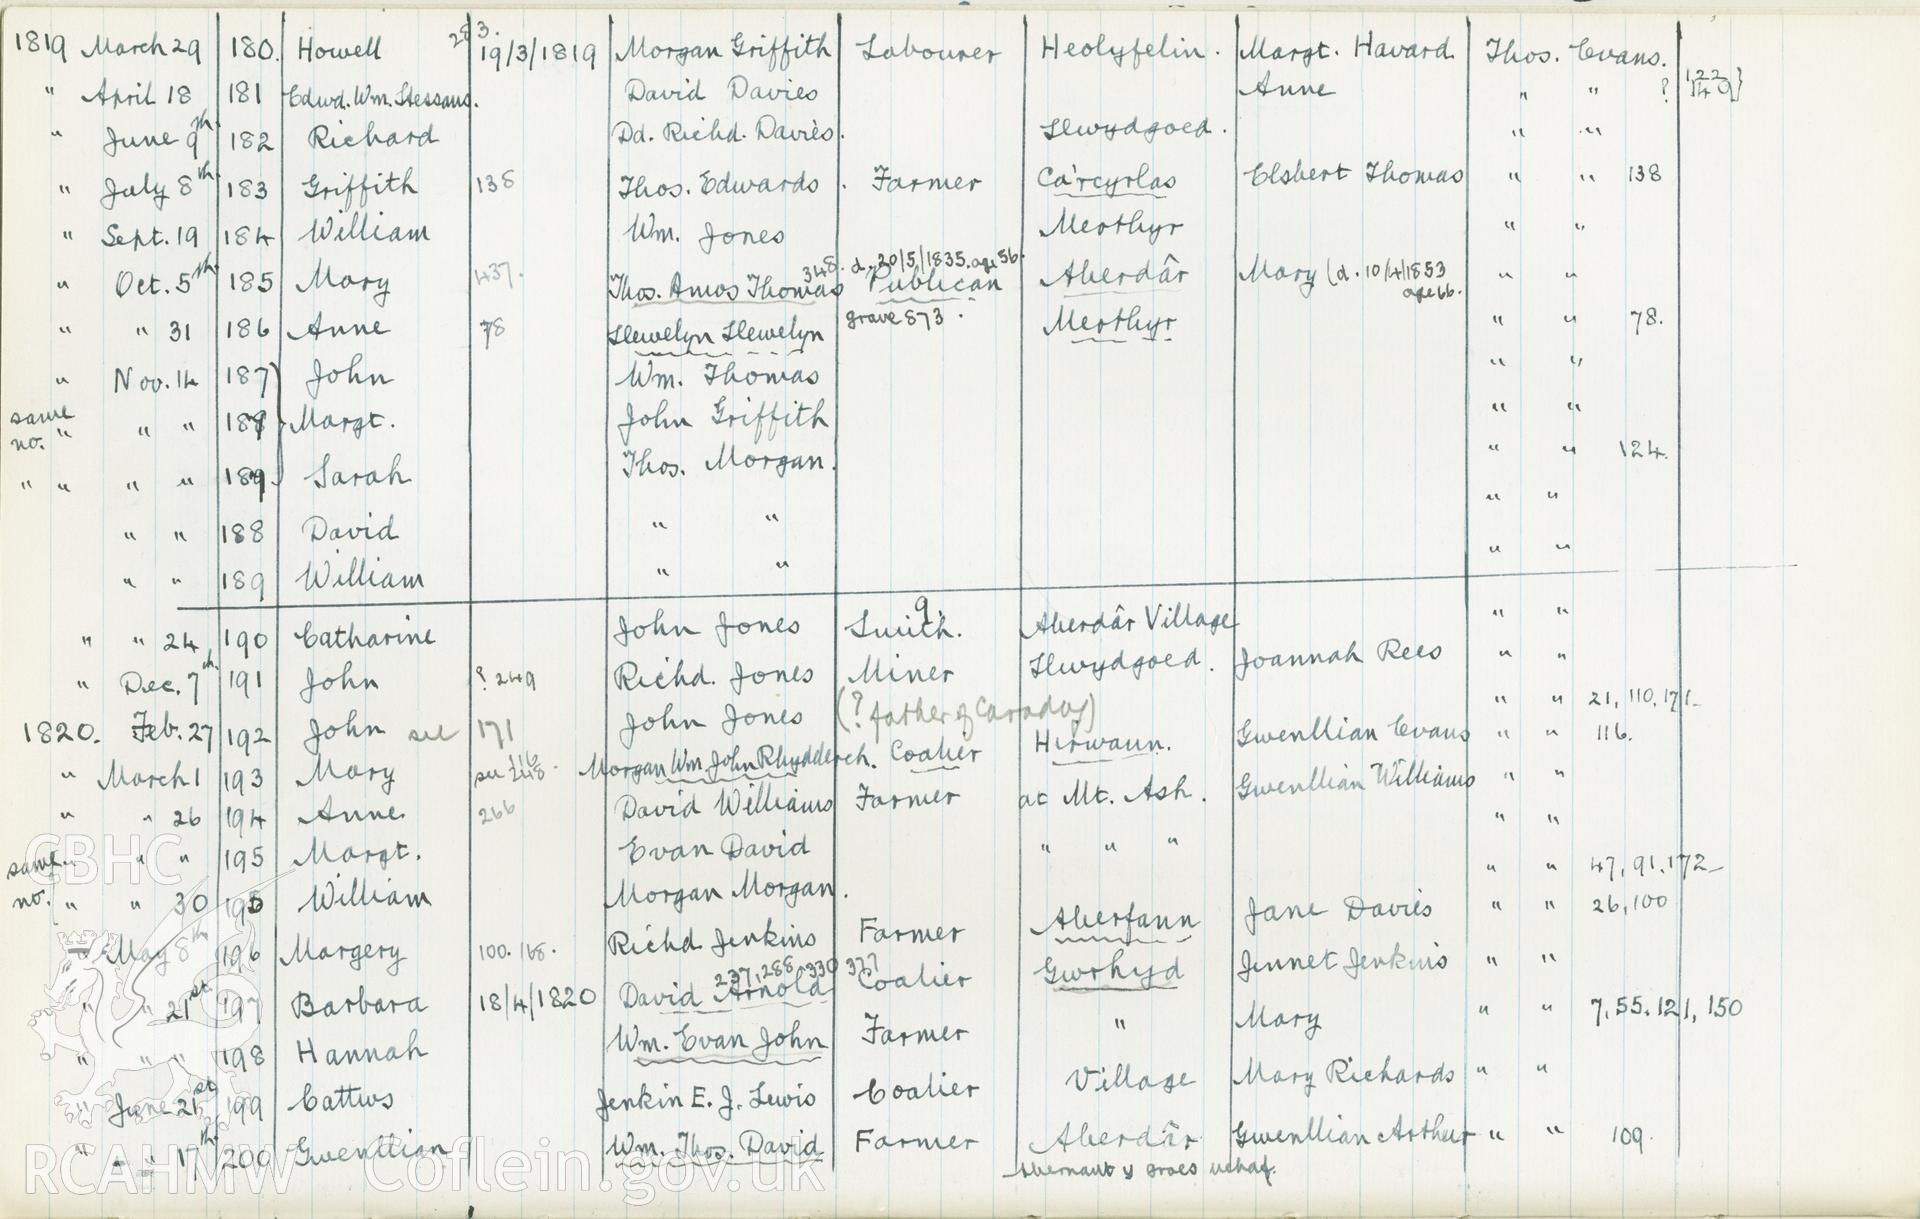 "Baptism Registered" book for Hen Dy Cwrdd, made between April 19th and 28th, 1941, by W. W. Price. Page listing baptisms from 29th March 1819 to 17th June 1820. Donated to the RCAHMW as part of the Digital Dissent Project.